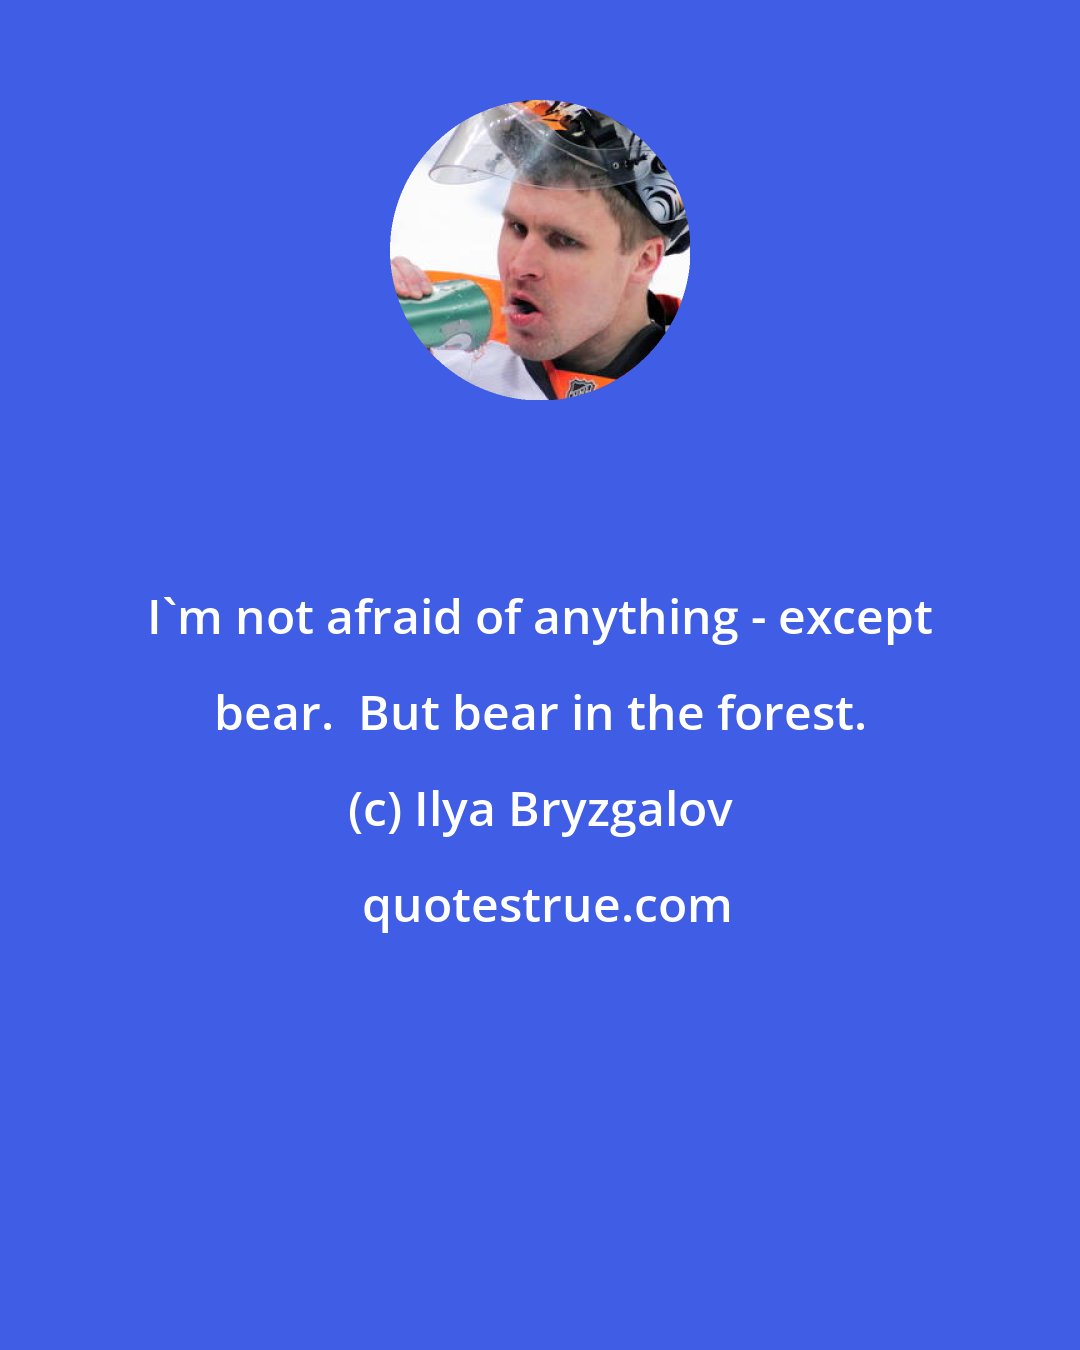 Ilya Bryzgalov: I'm not afraid of anything - except bear.  But bear in the forest.